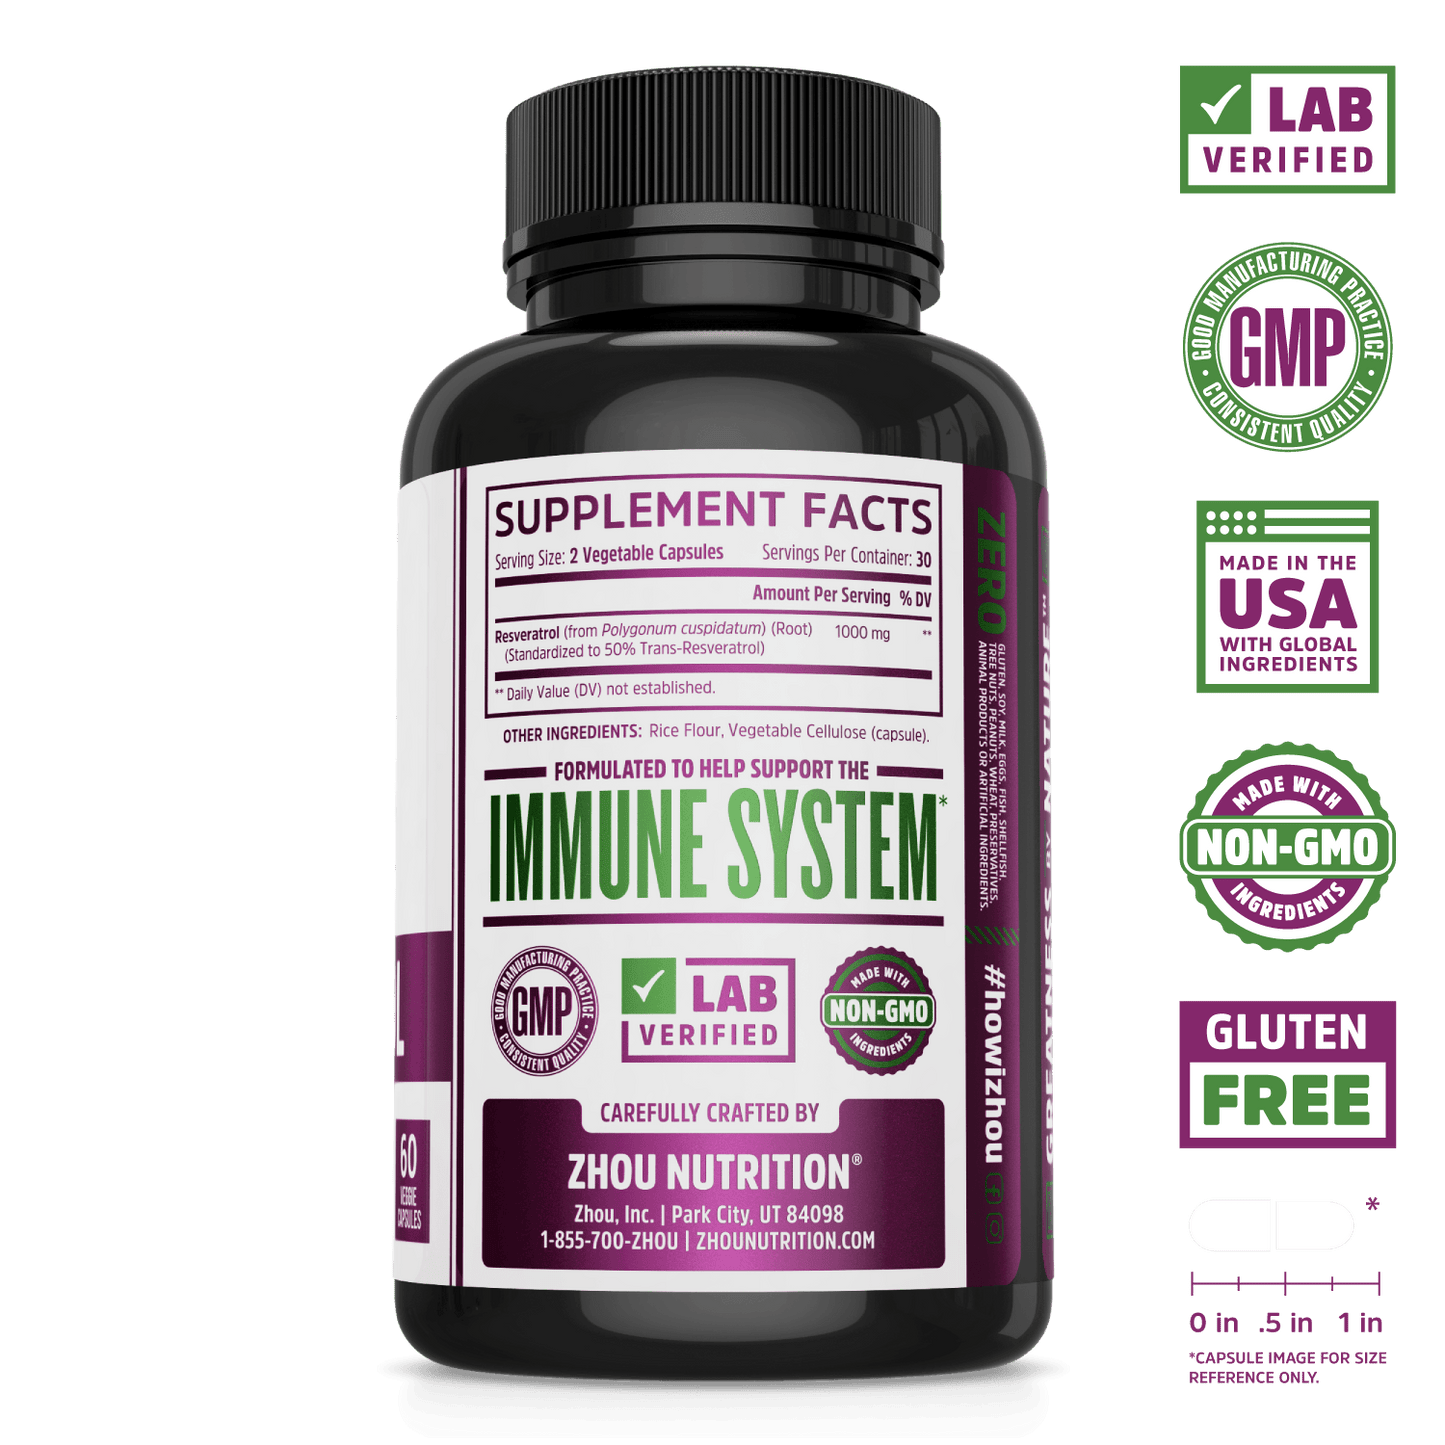 Zhou Nutrition High Potency Resveratrol Capsules. Lab verified, good manufacturing practices, made in the USA with global ingredients, made with non-GMO ingredients, gluten free